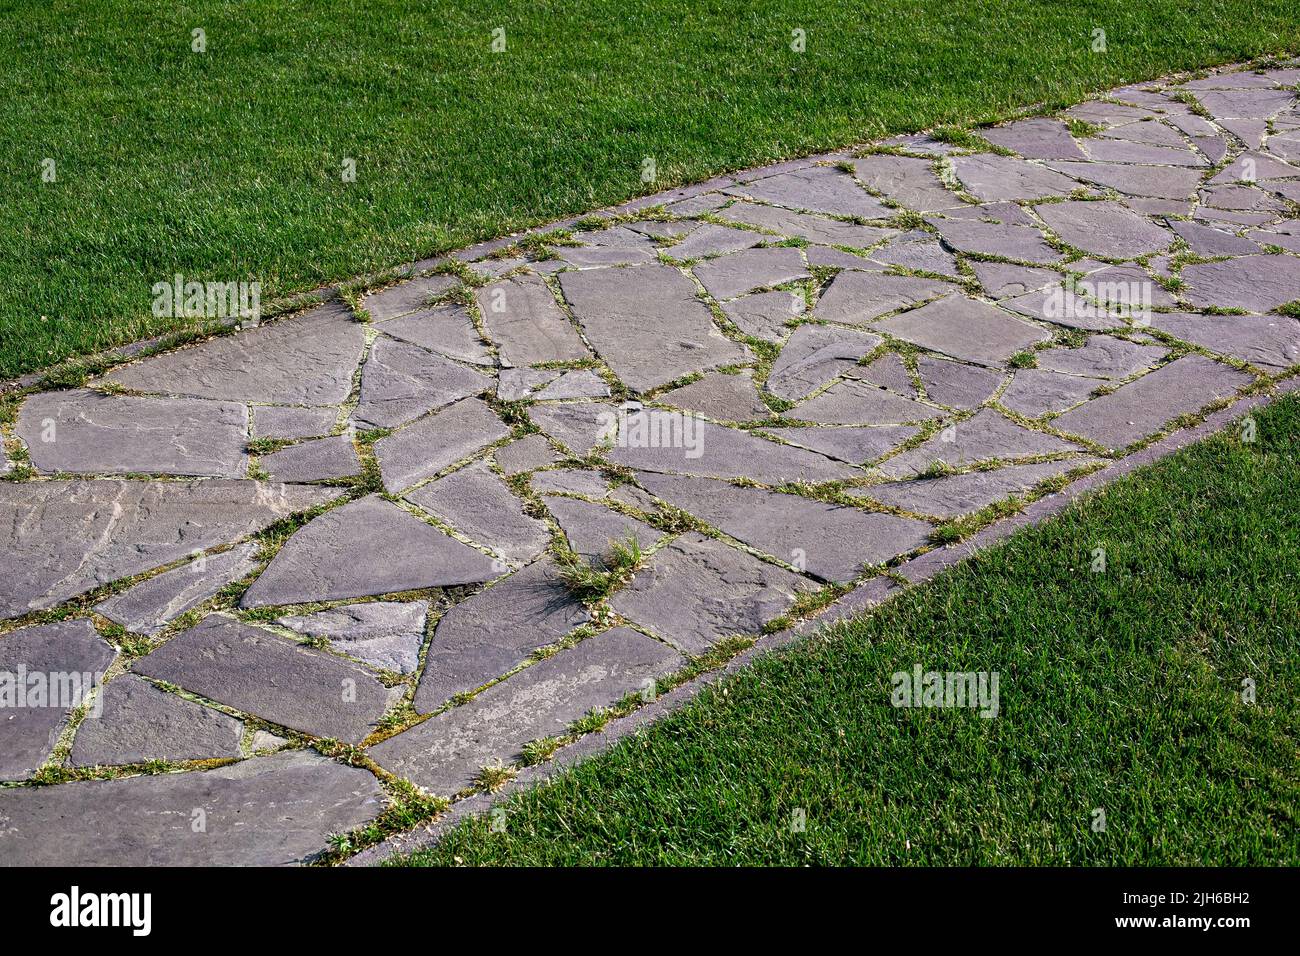 garden path made of natural stone paved with different size rough rock overgrown with grass in park with green lawn close-up of backyard way with abst Stock Photo